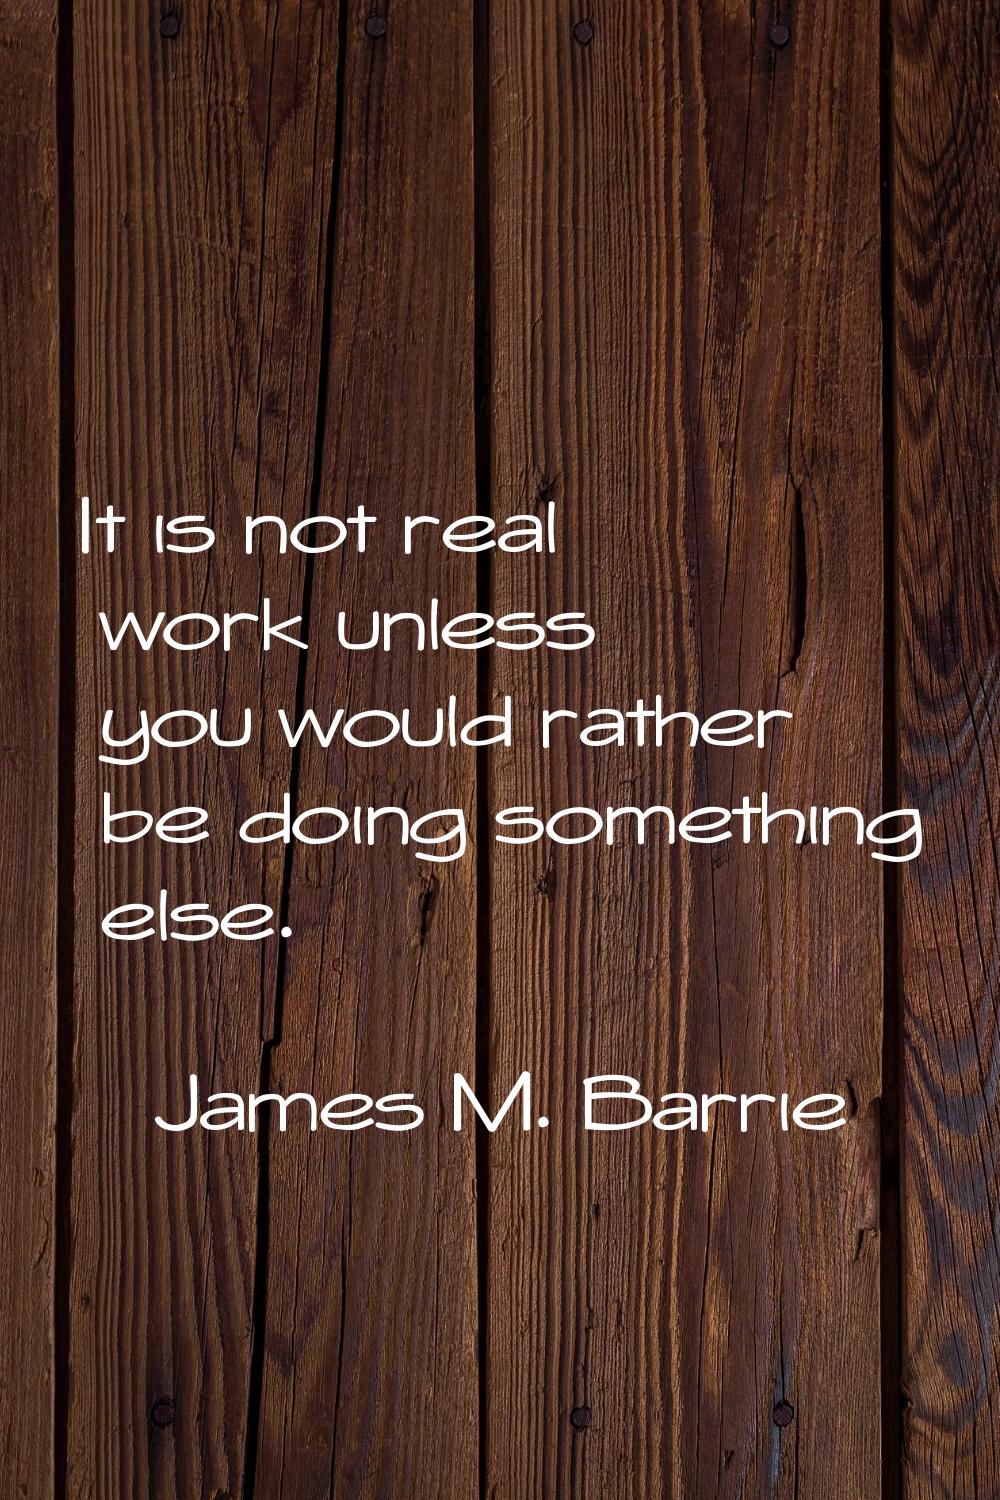 It is not real work unless you would rather be doing something else.